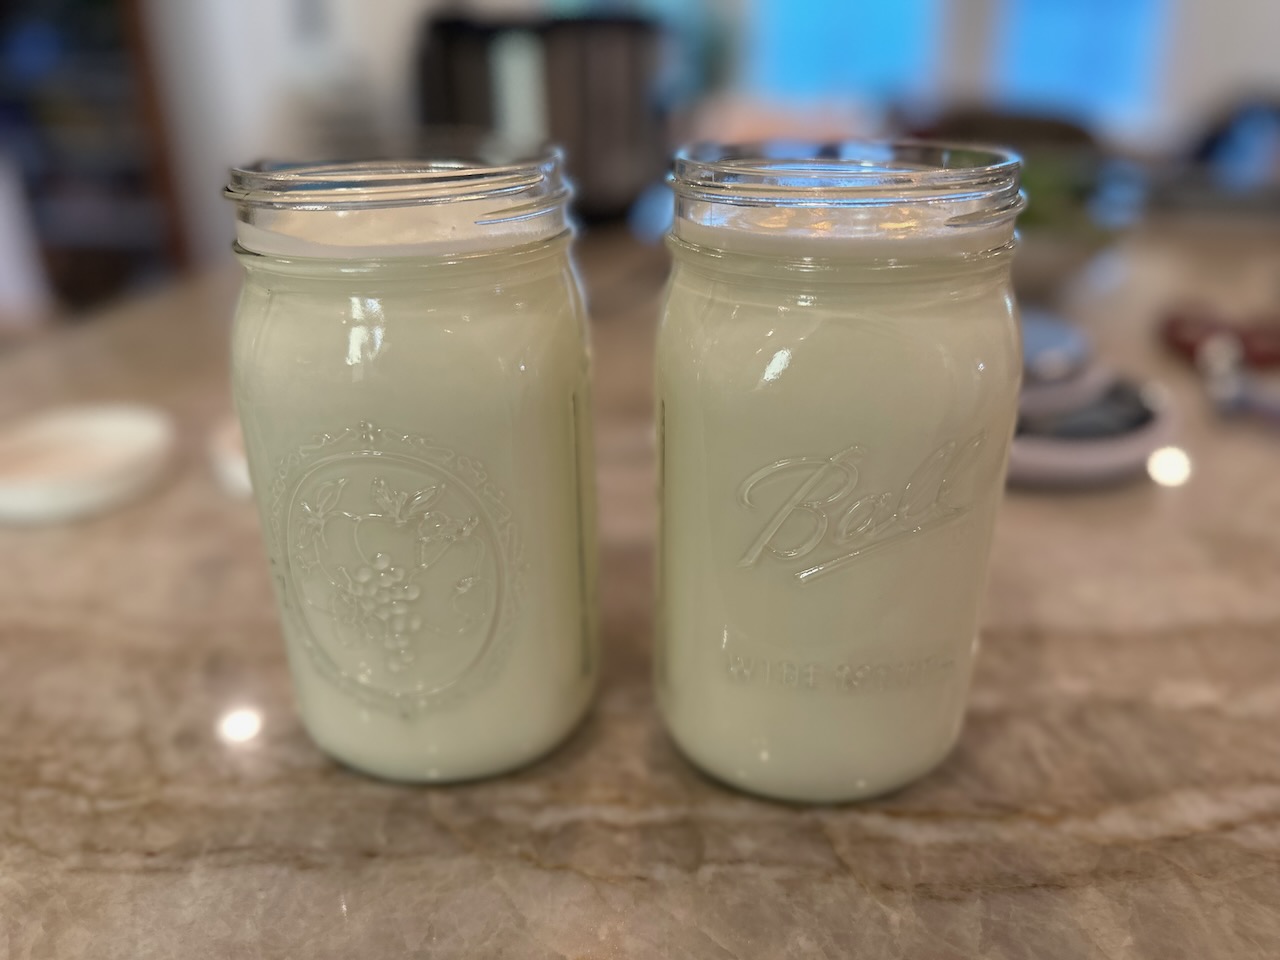 two quart-size glass jars filled with white fluid